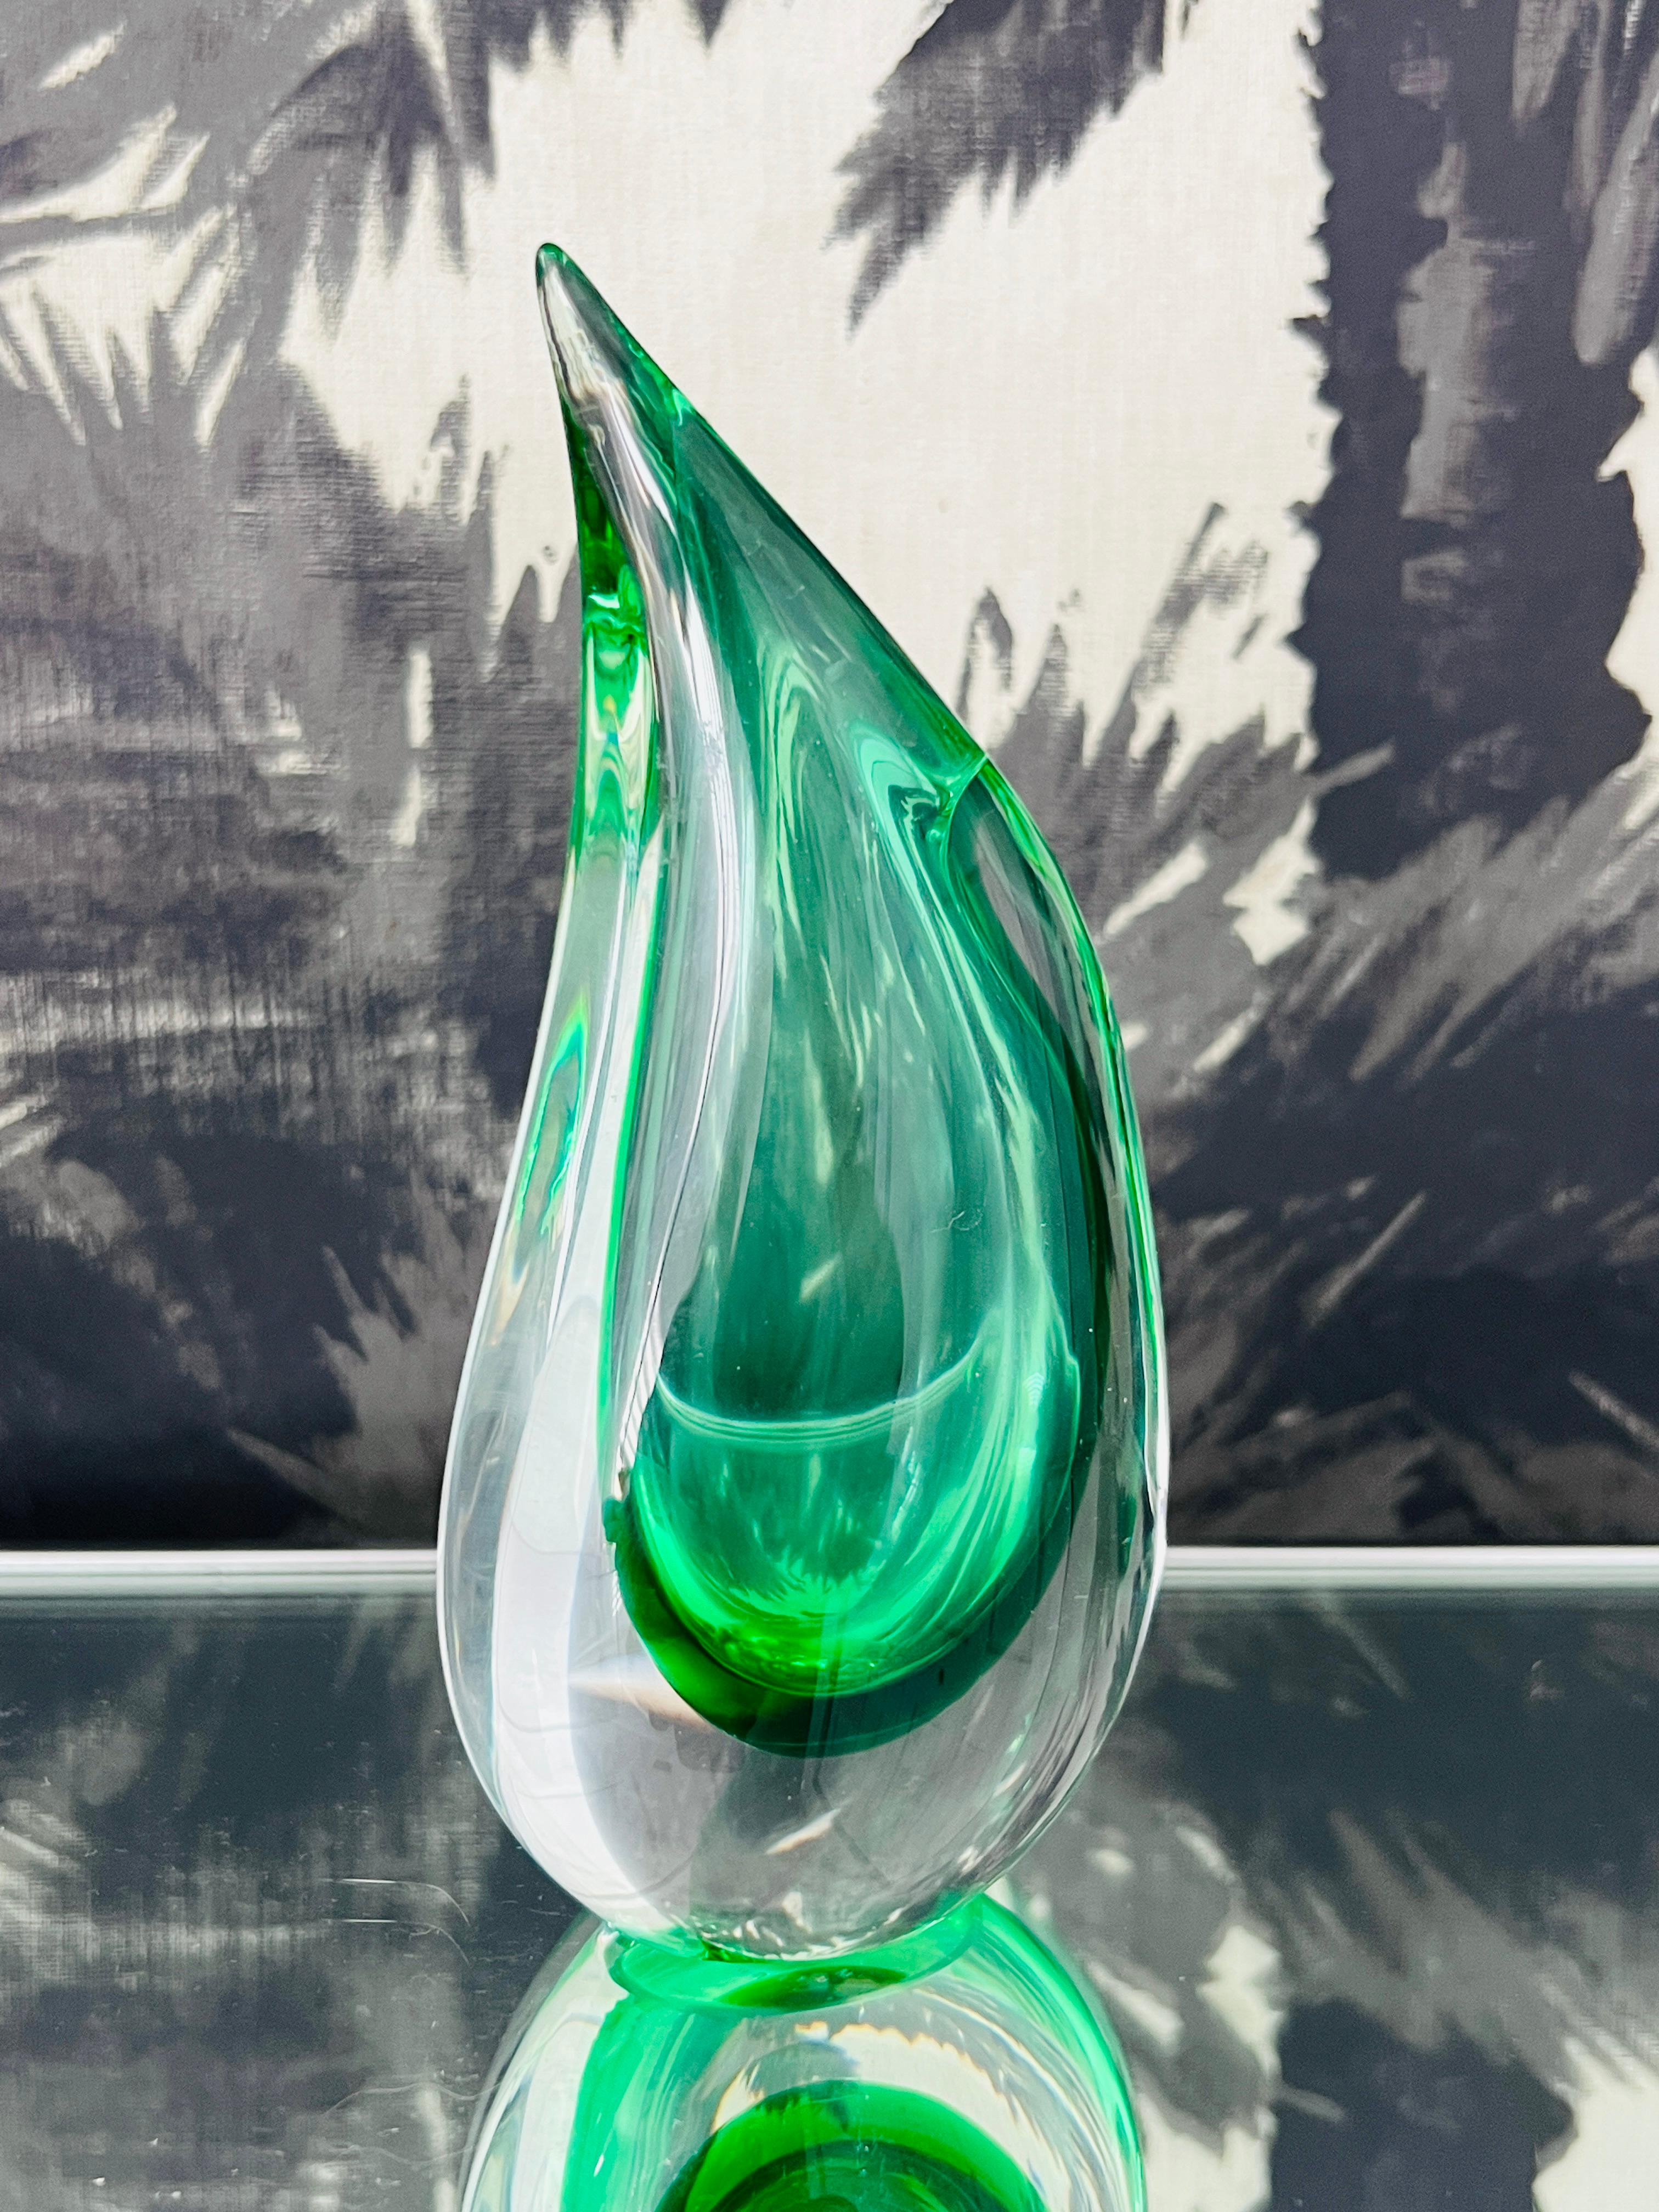 Hand-Crafted Green Murano Glass Bud Vase with Flame Tip Design by Luigi Onesto, 1970's Signed